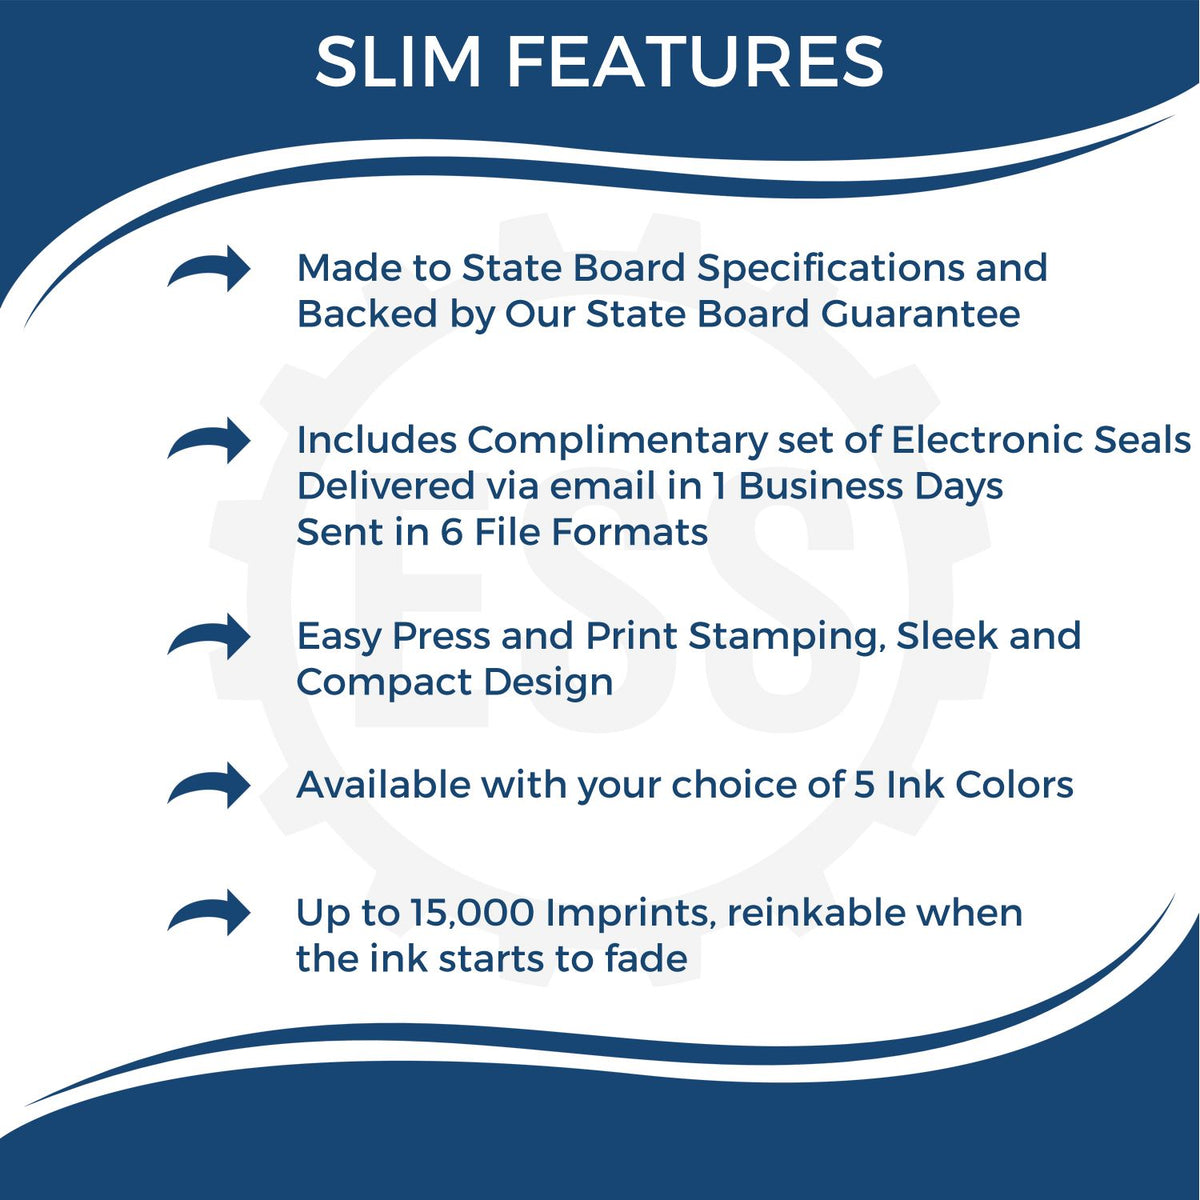 A picture of an infographic highlighting the selling points for the Slim Pre-Inked Guam Landscape Architect Seal Stamp